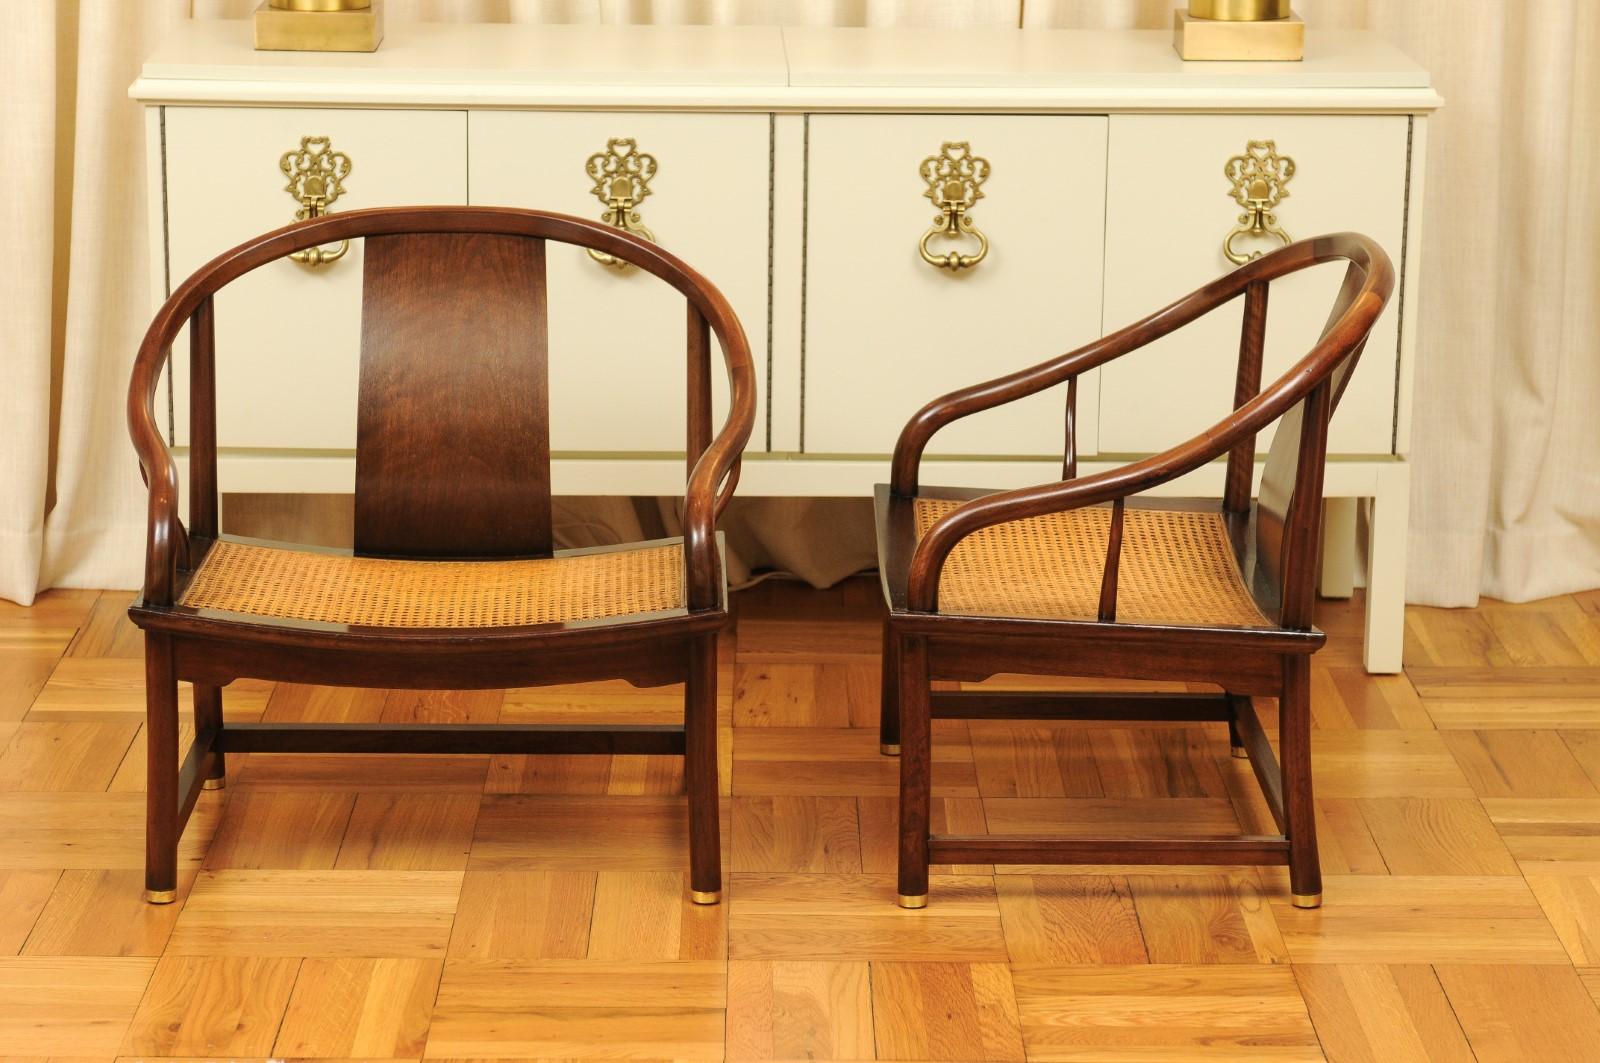 Stunning Restored Pair of Walnut Cane Loungers by Michael Taylor, circa 1960 For Sale 10